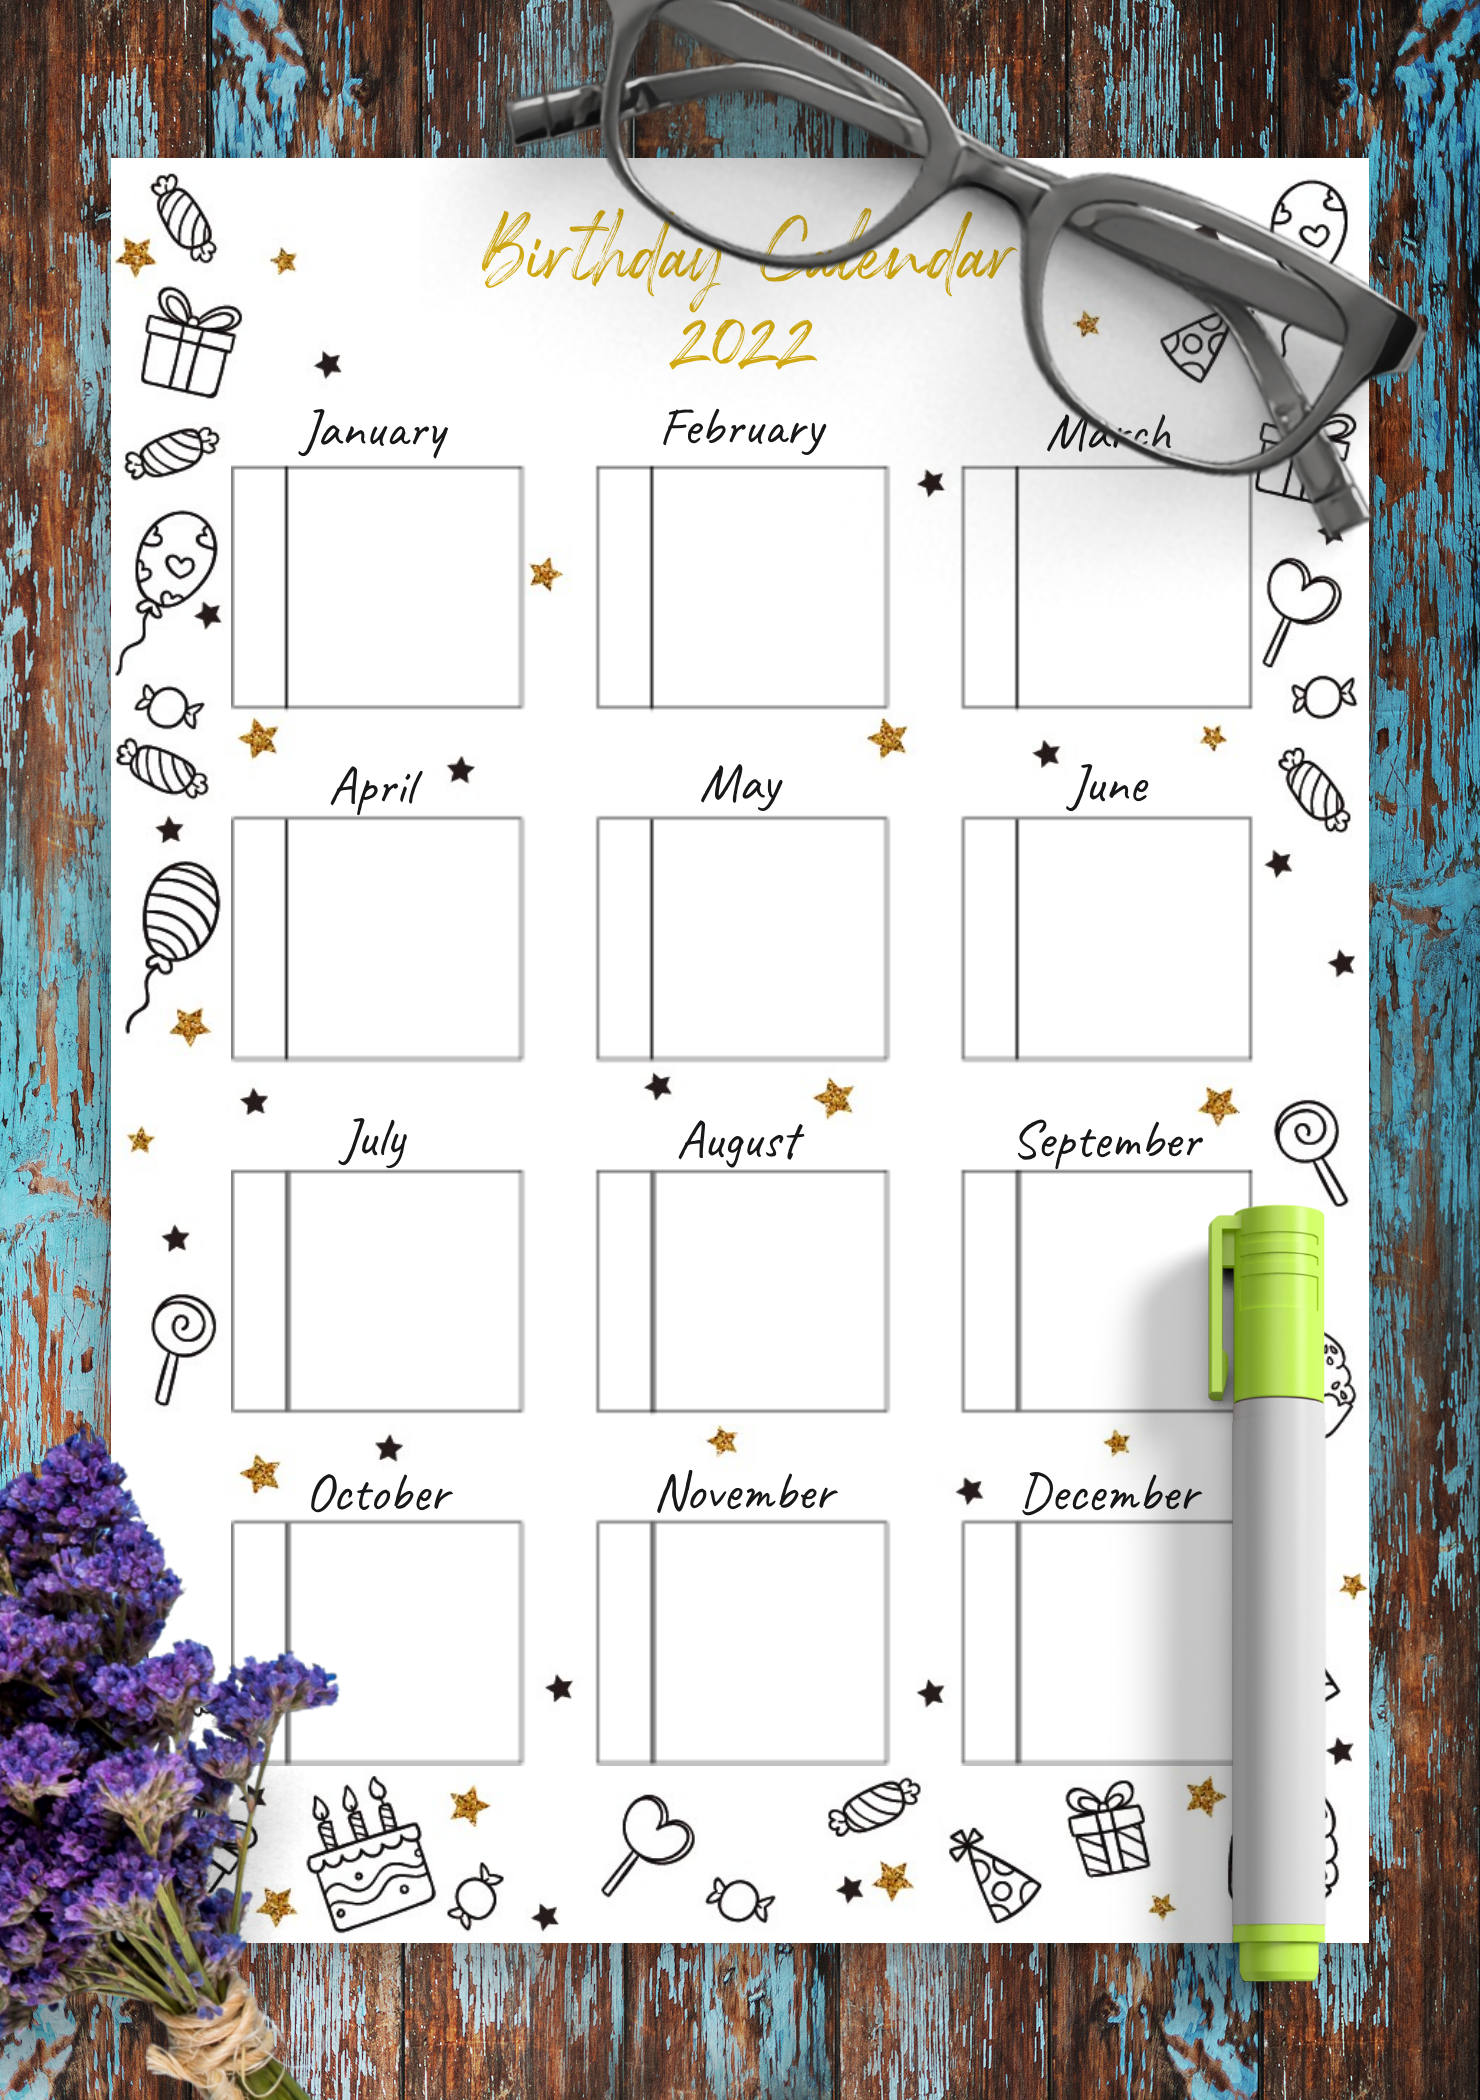 7-best-images-of-printable-for-classroom-birthday-charts-free-birthday-calendar-printable